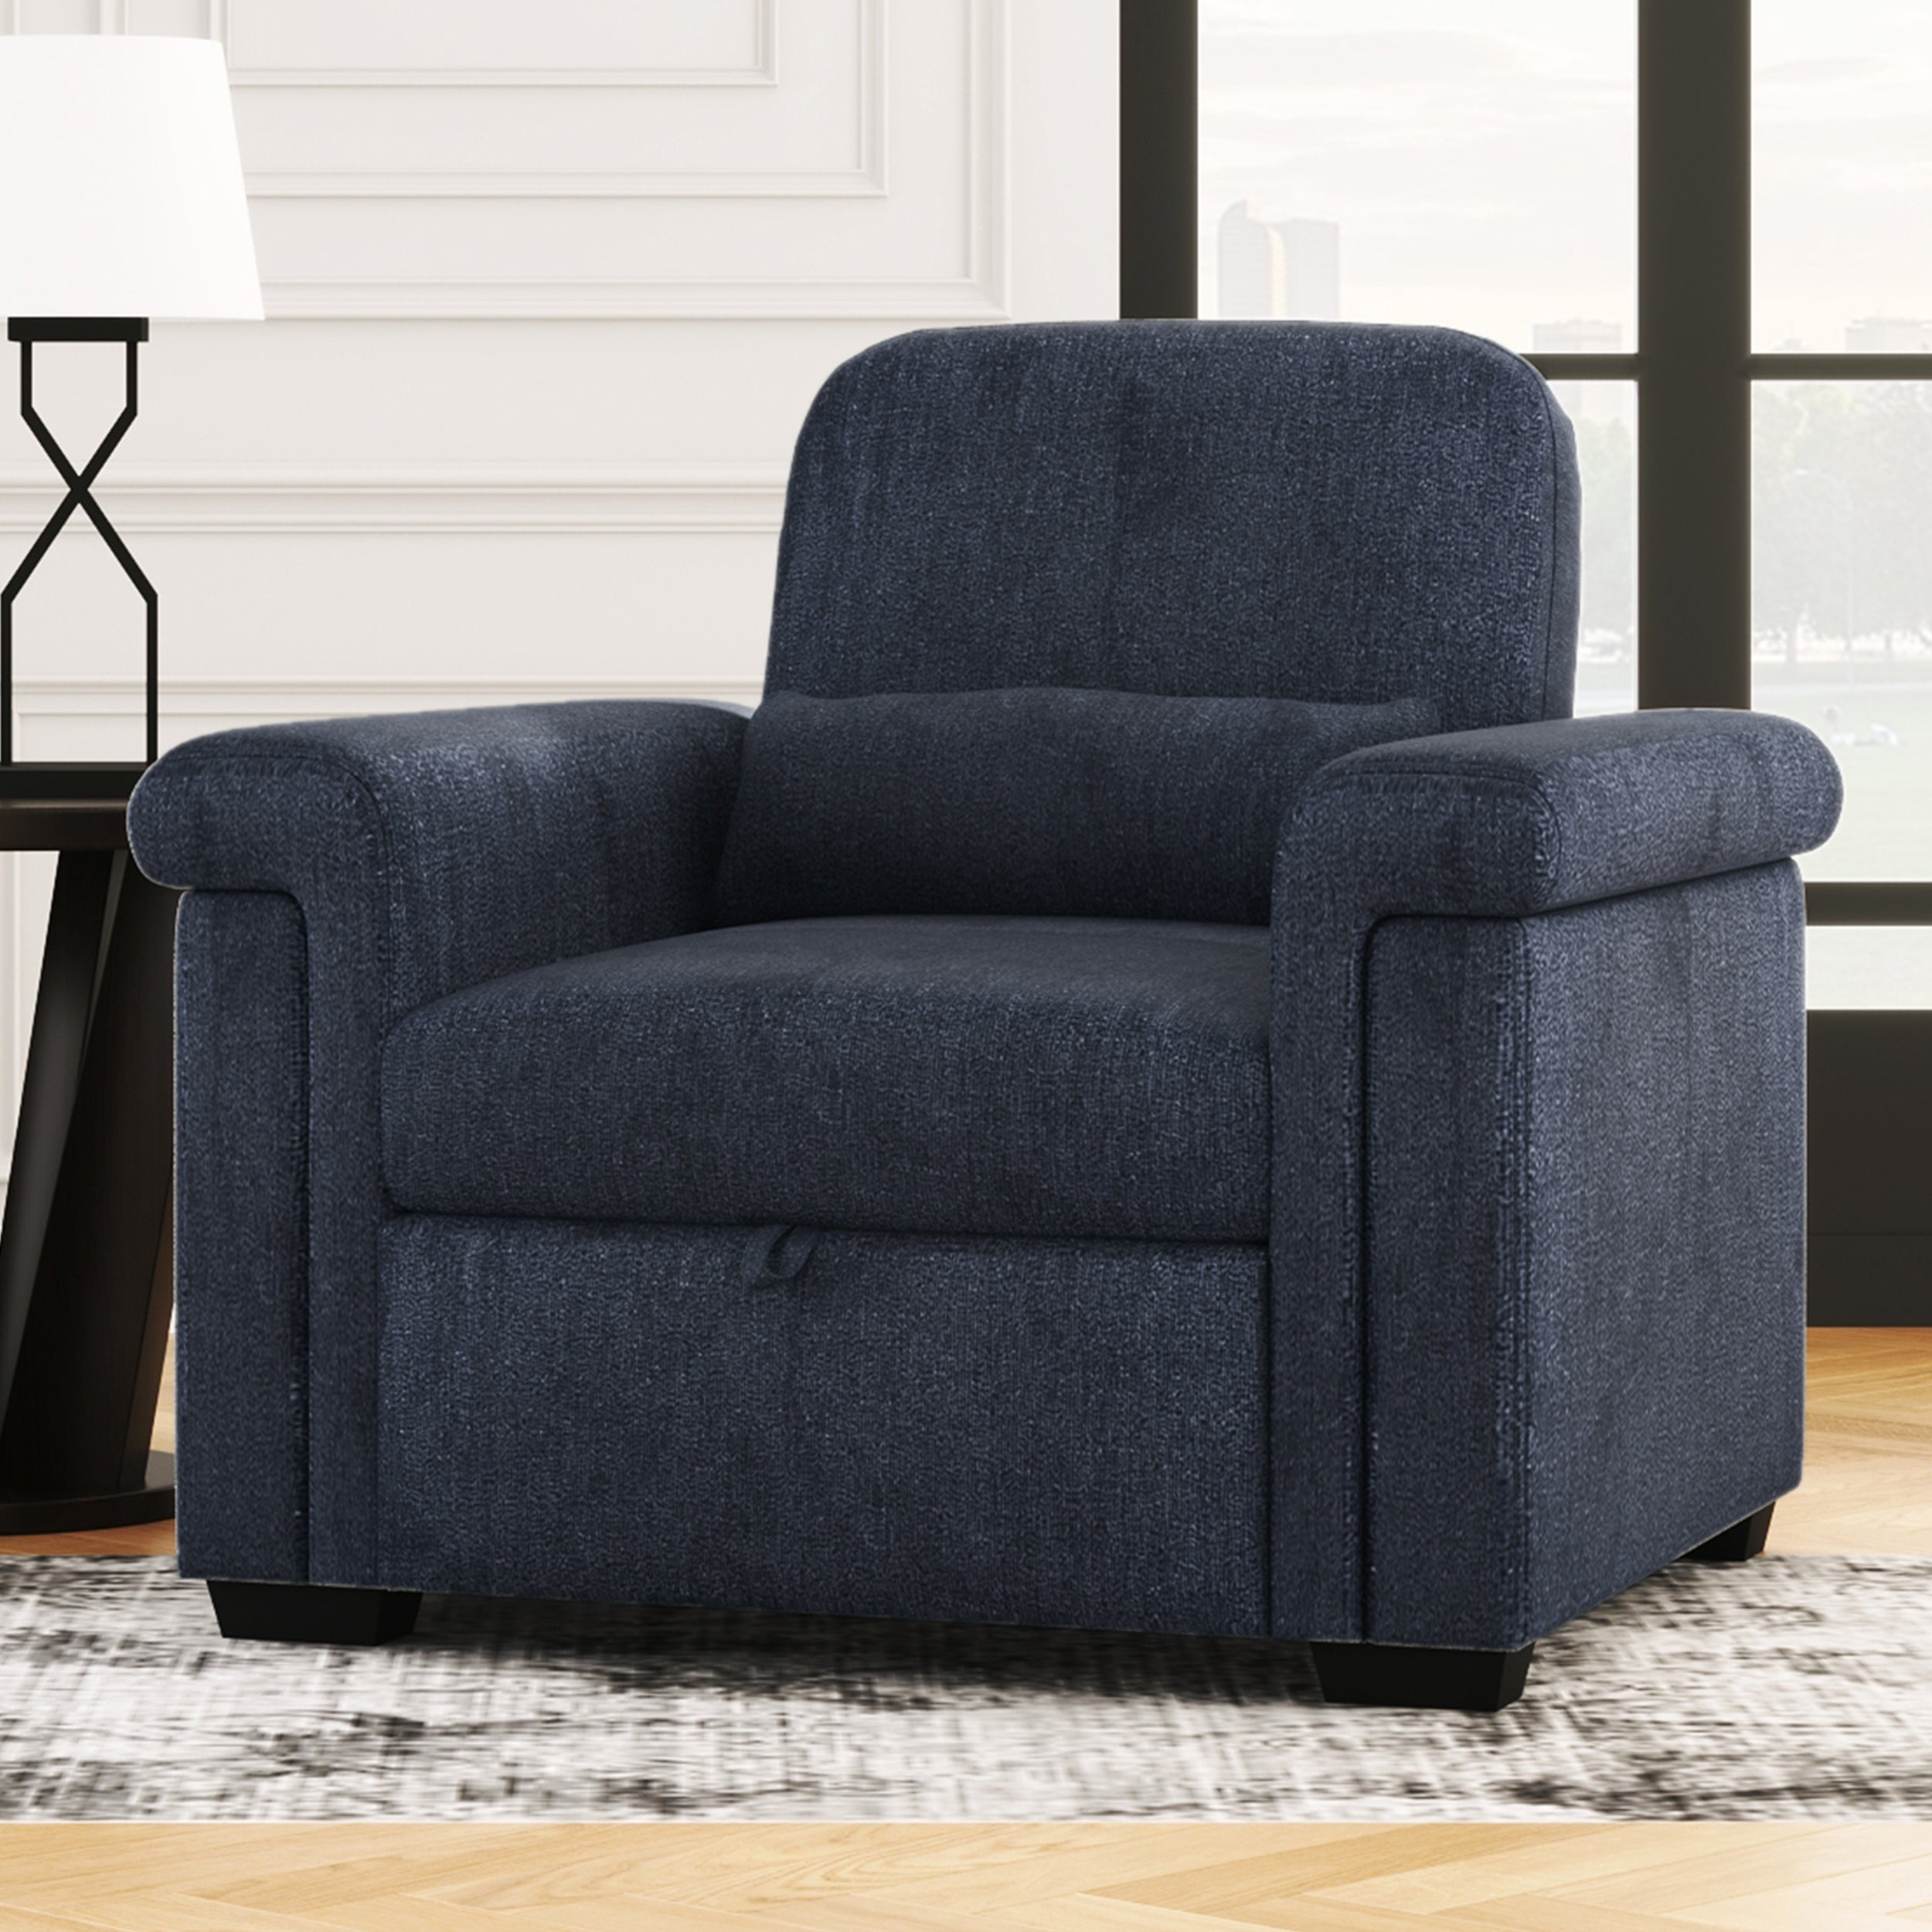 🆓🚛 3 In 1 Convertible Sleeper Chair Sofa Bed Pull Out Couch Adjustable Chair With Pillow, Adjust Backrest Into a Sofa, Lounger Chair, Single Bed Or Living Room Or Apartment, Dark Blue